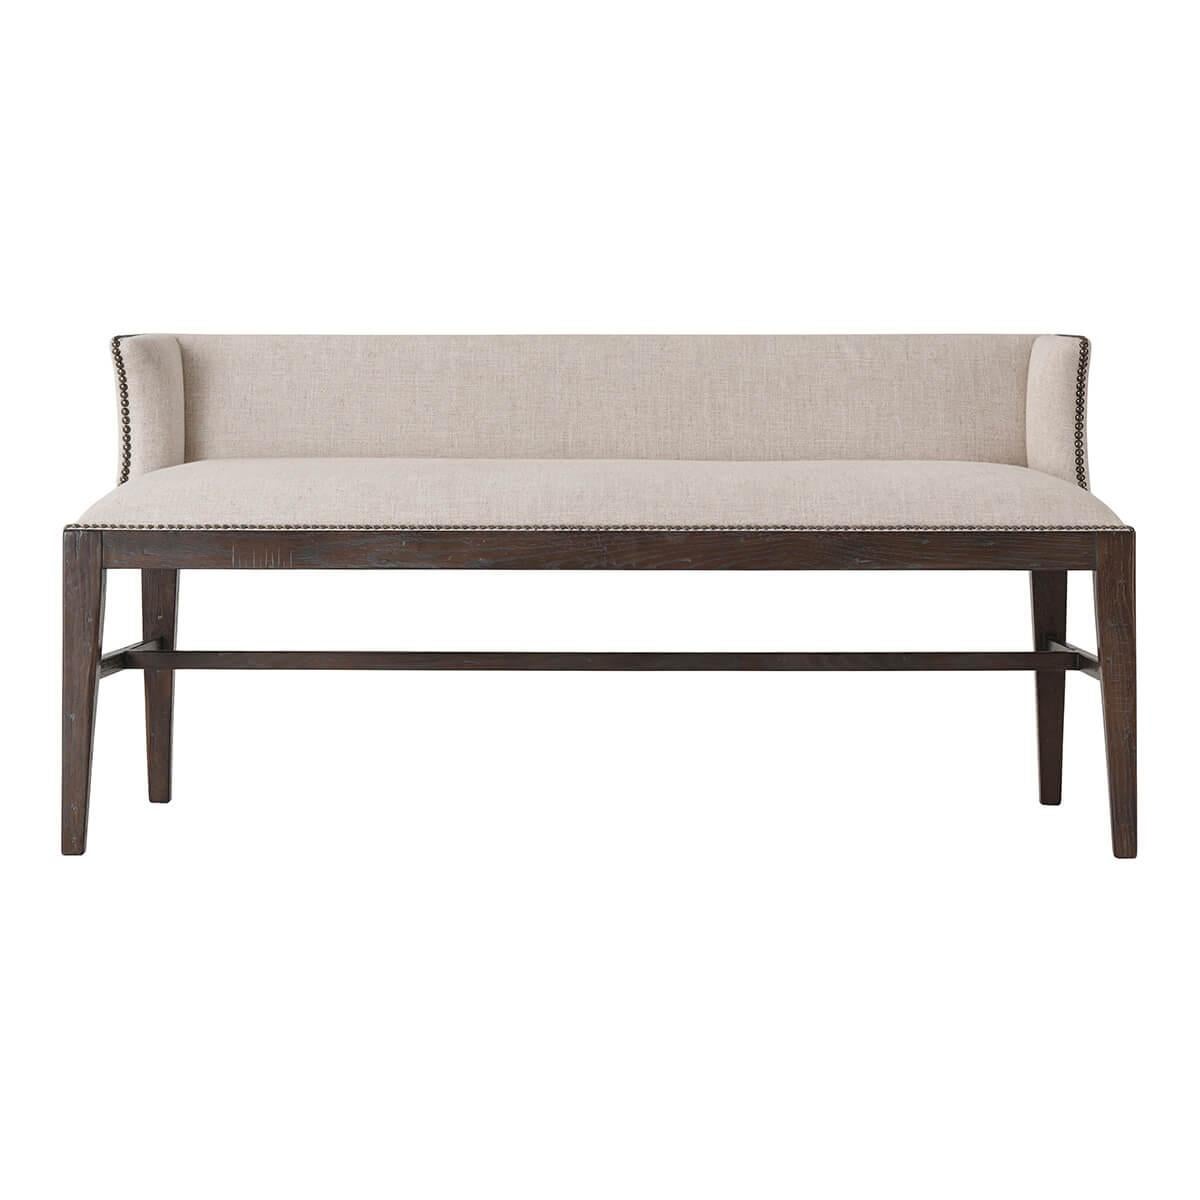 A modern dark oak upholstered bench with an upholstered low winged backrest with nailhead detailing one square tapered legs with an H-form stretcher base.
Dimensions: 54